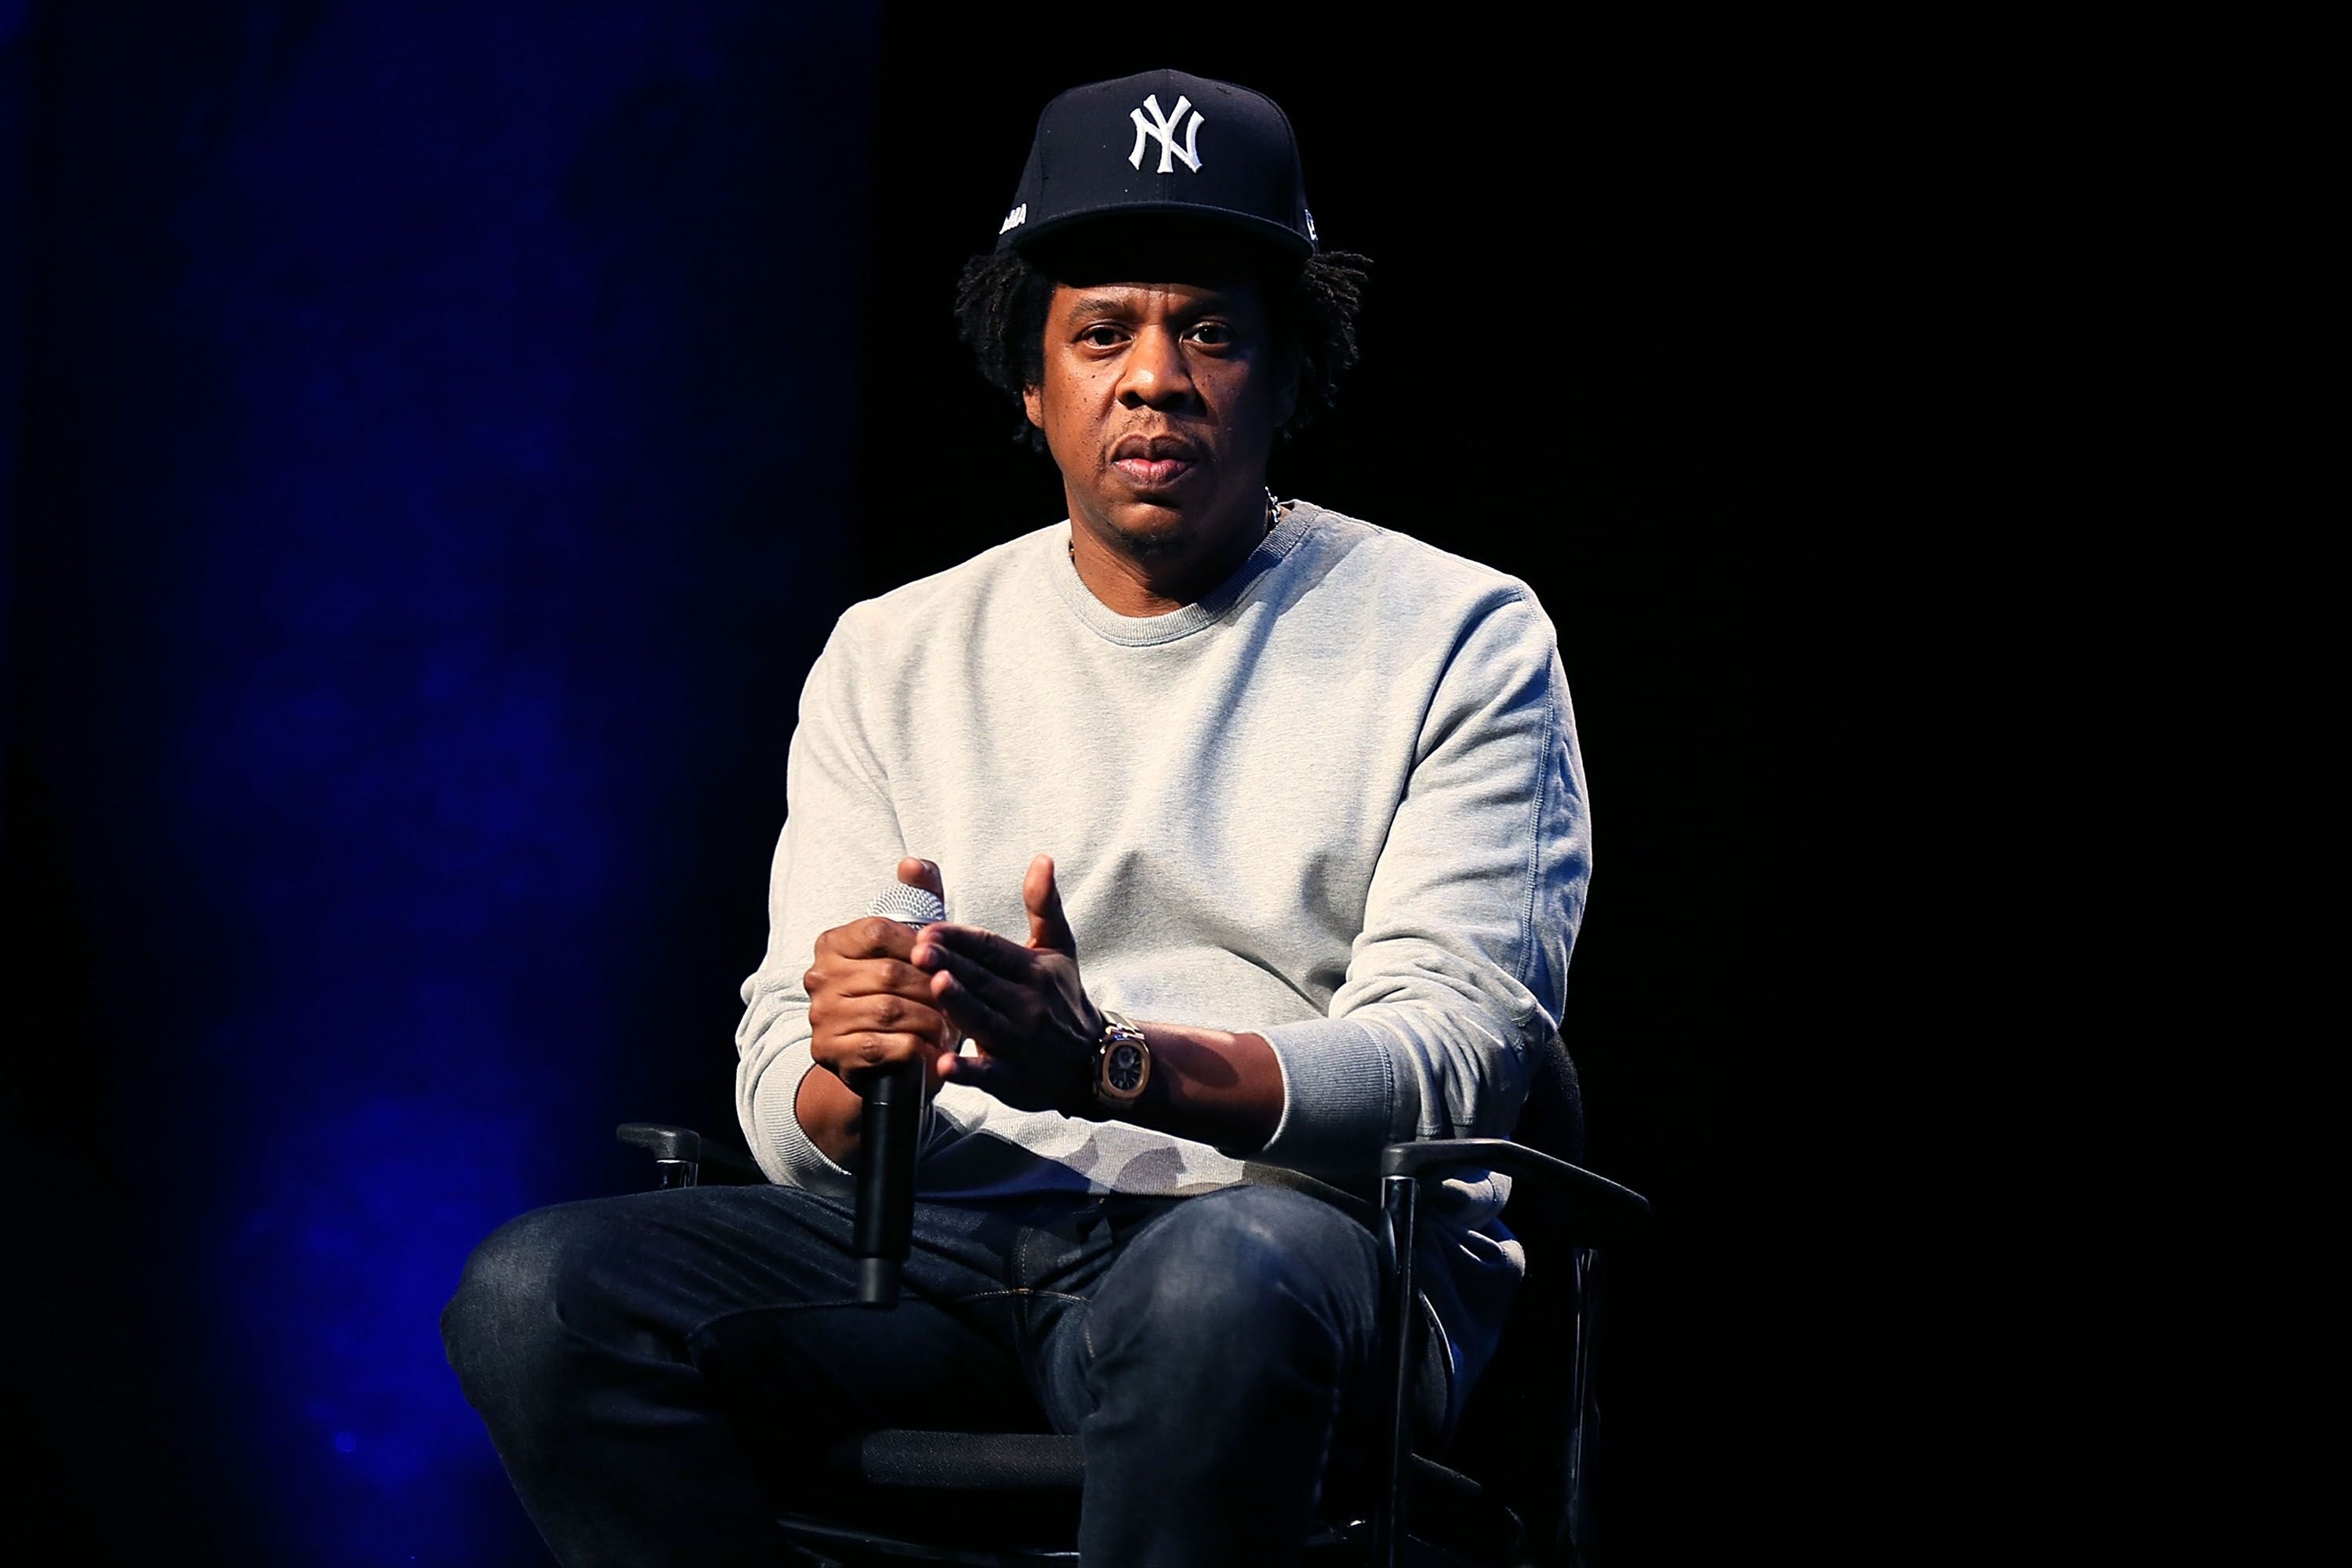 Jay-Z at a speaking engagement | Source: Getty Images/GlobalImagesUkraine